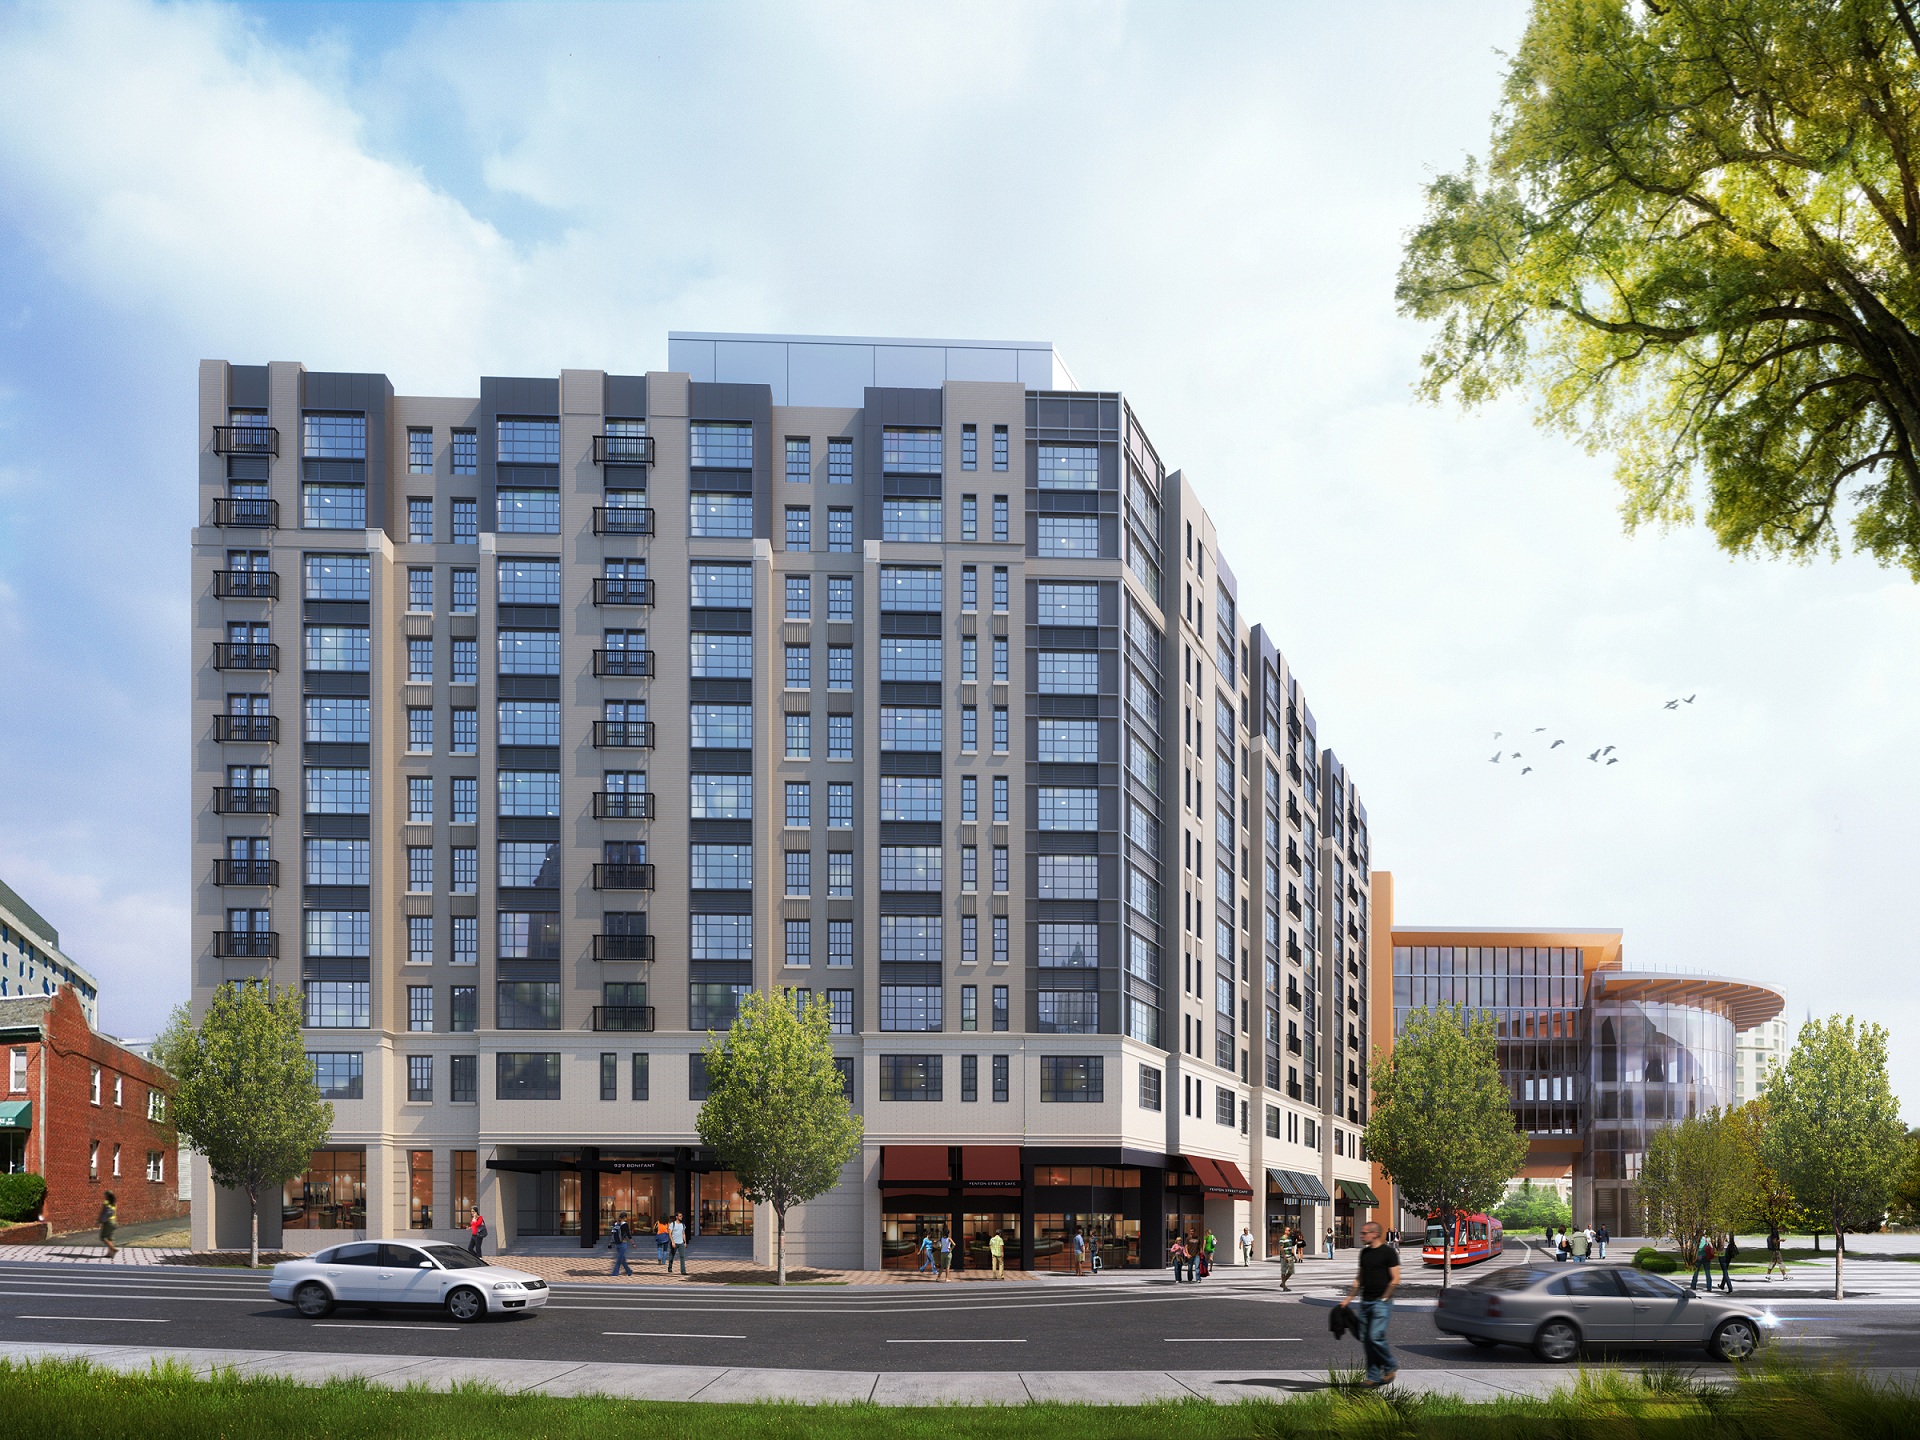 Conceptual rendering showing, at street level, two facades of an approved 11-story building, with commercial uses on the first floor and residential units above; in the background to the right of the building is the Silver Spring library, shown as it will look when construction is complete. 